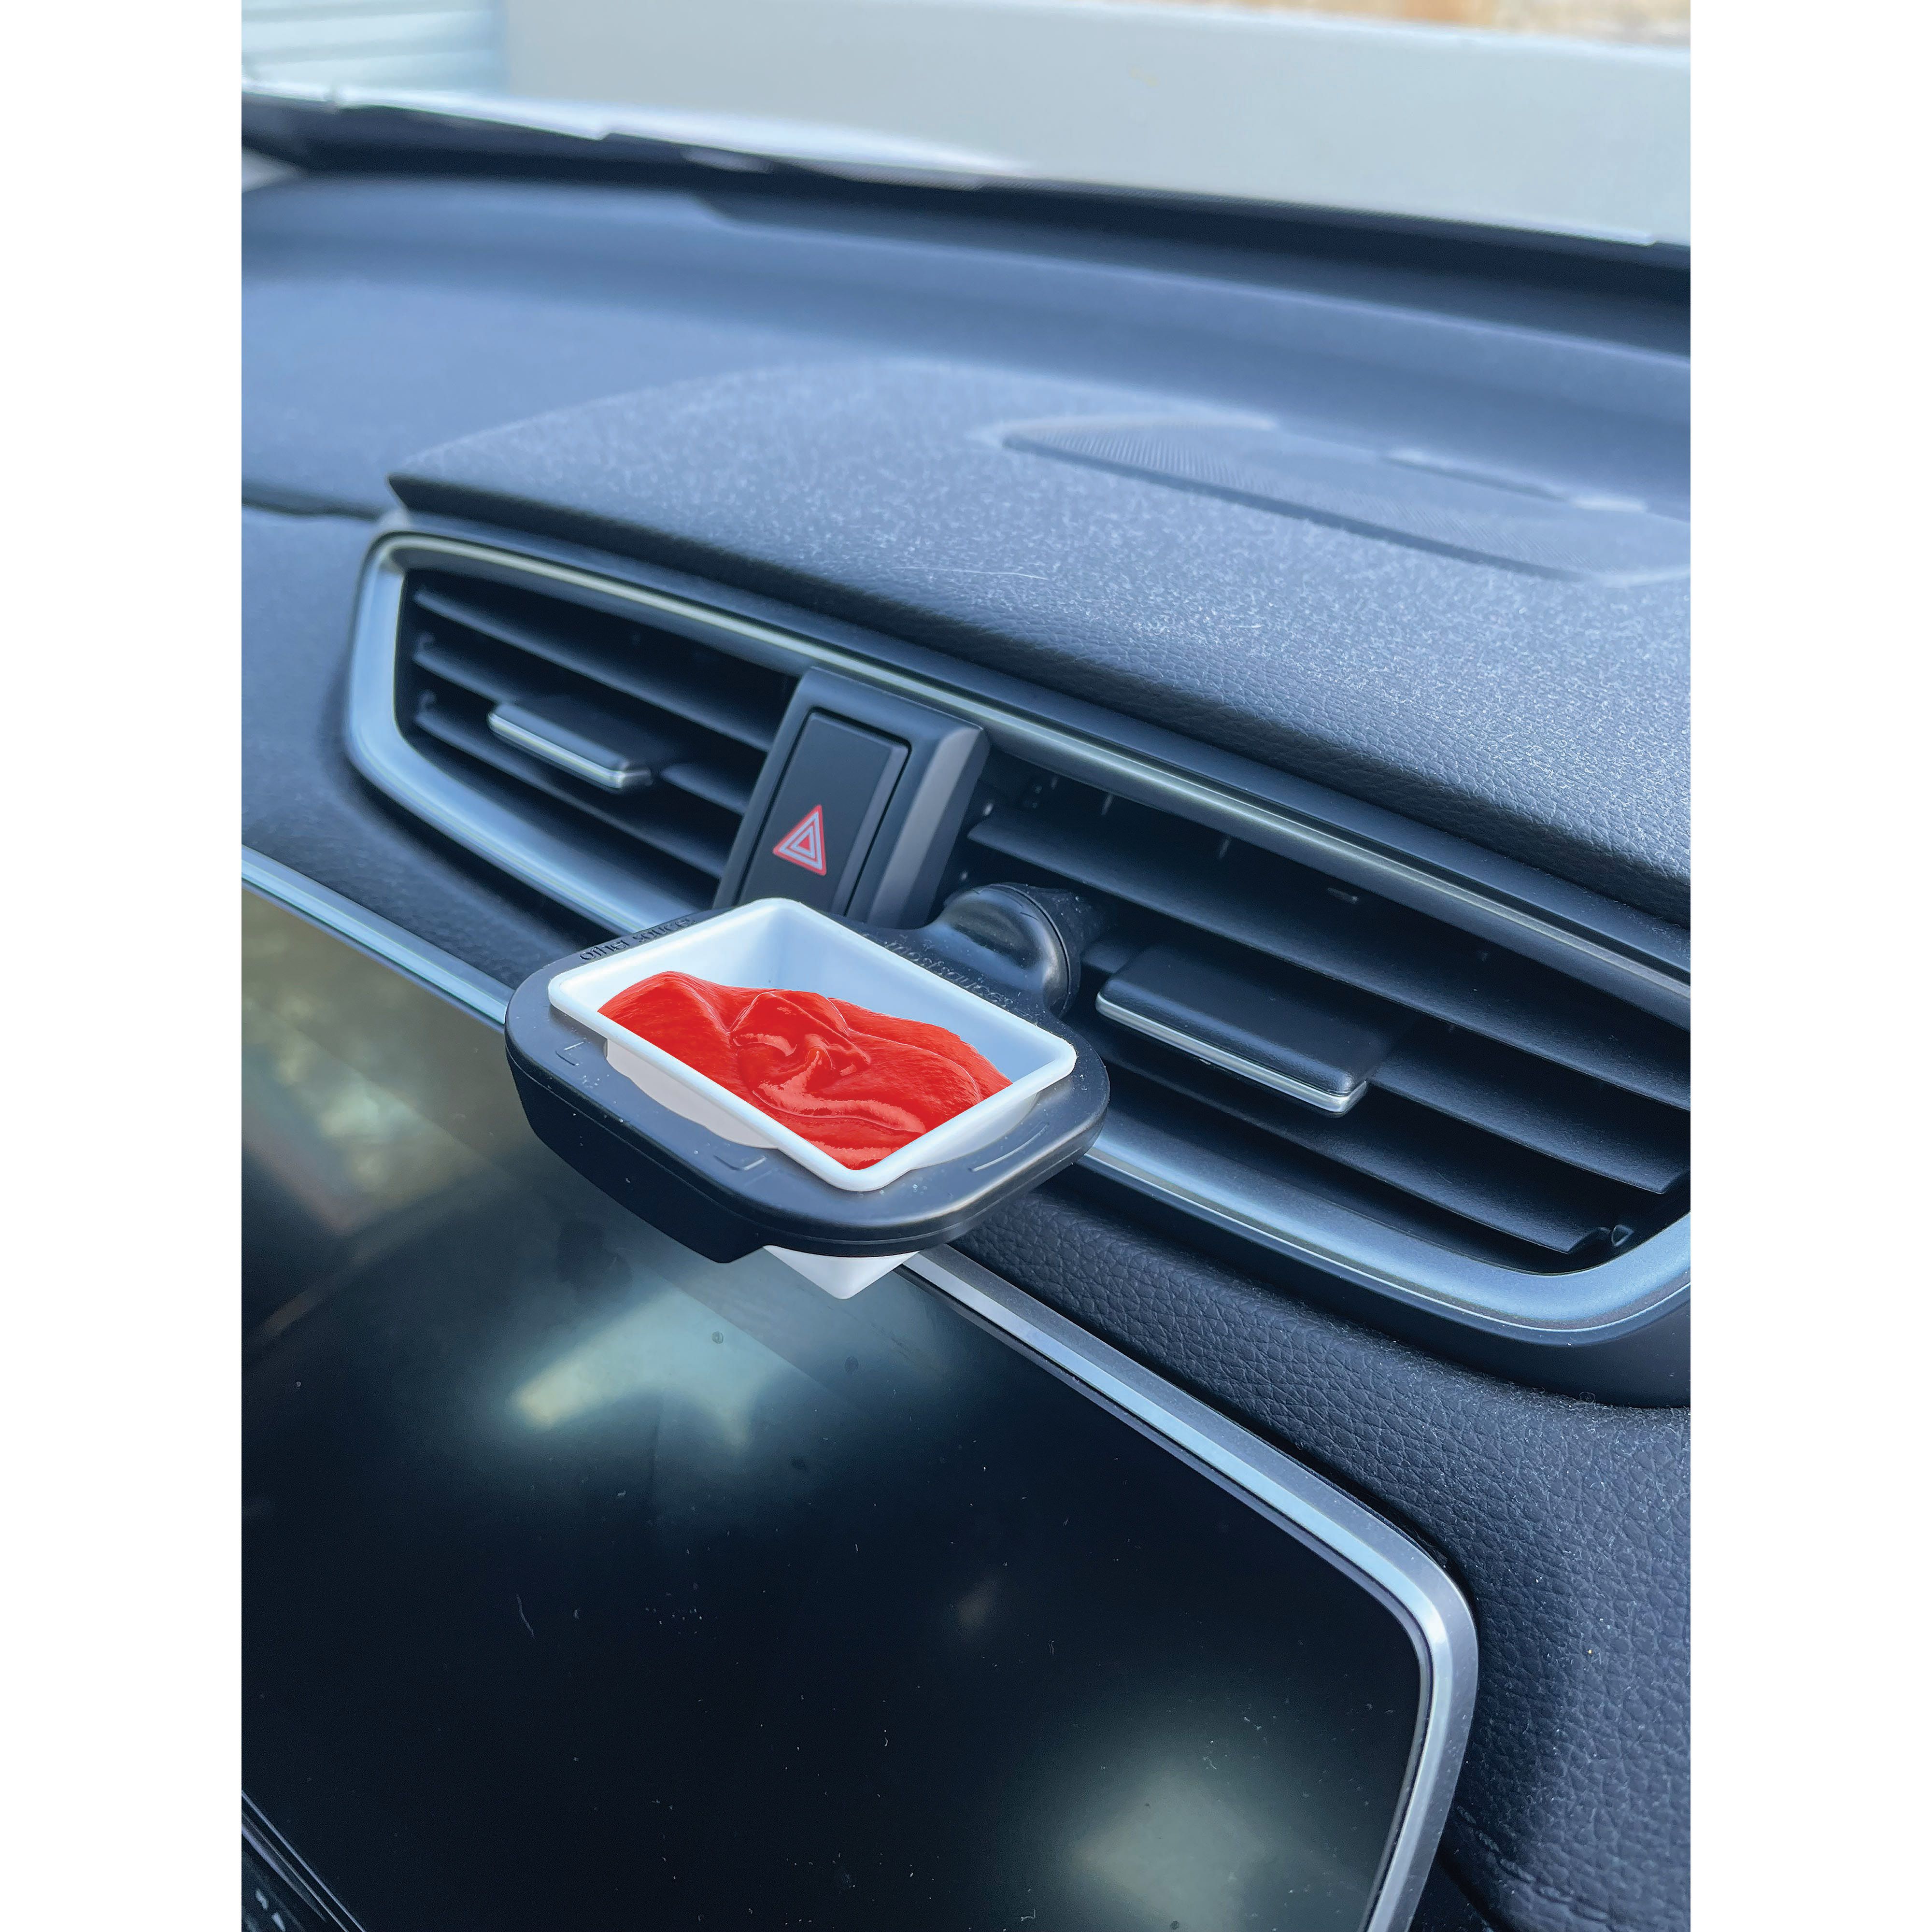 Car Chip & Sauce Holder-Fun & Games-IS Gift-The Bay Room